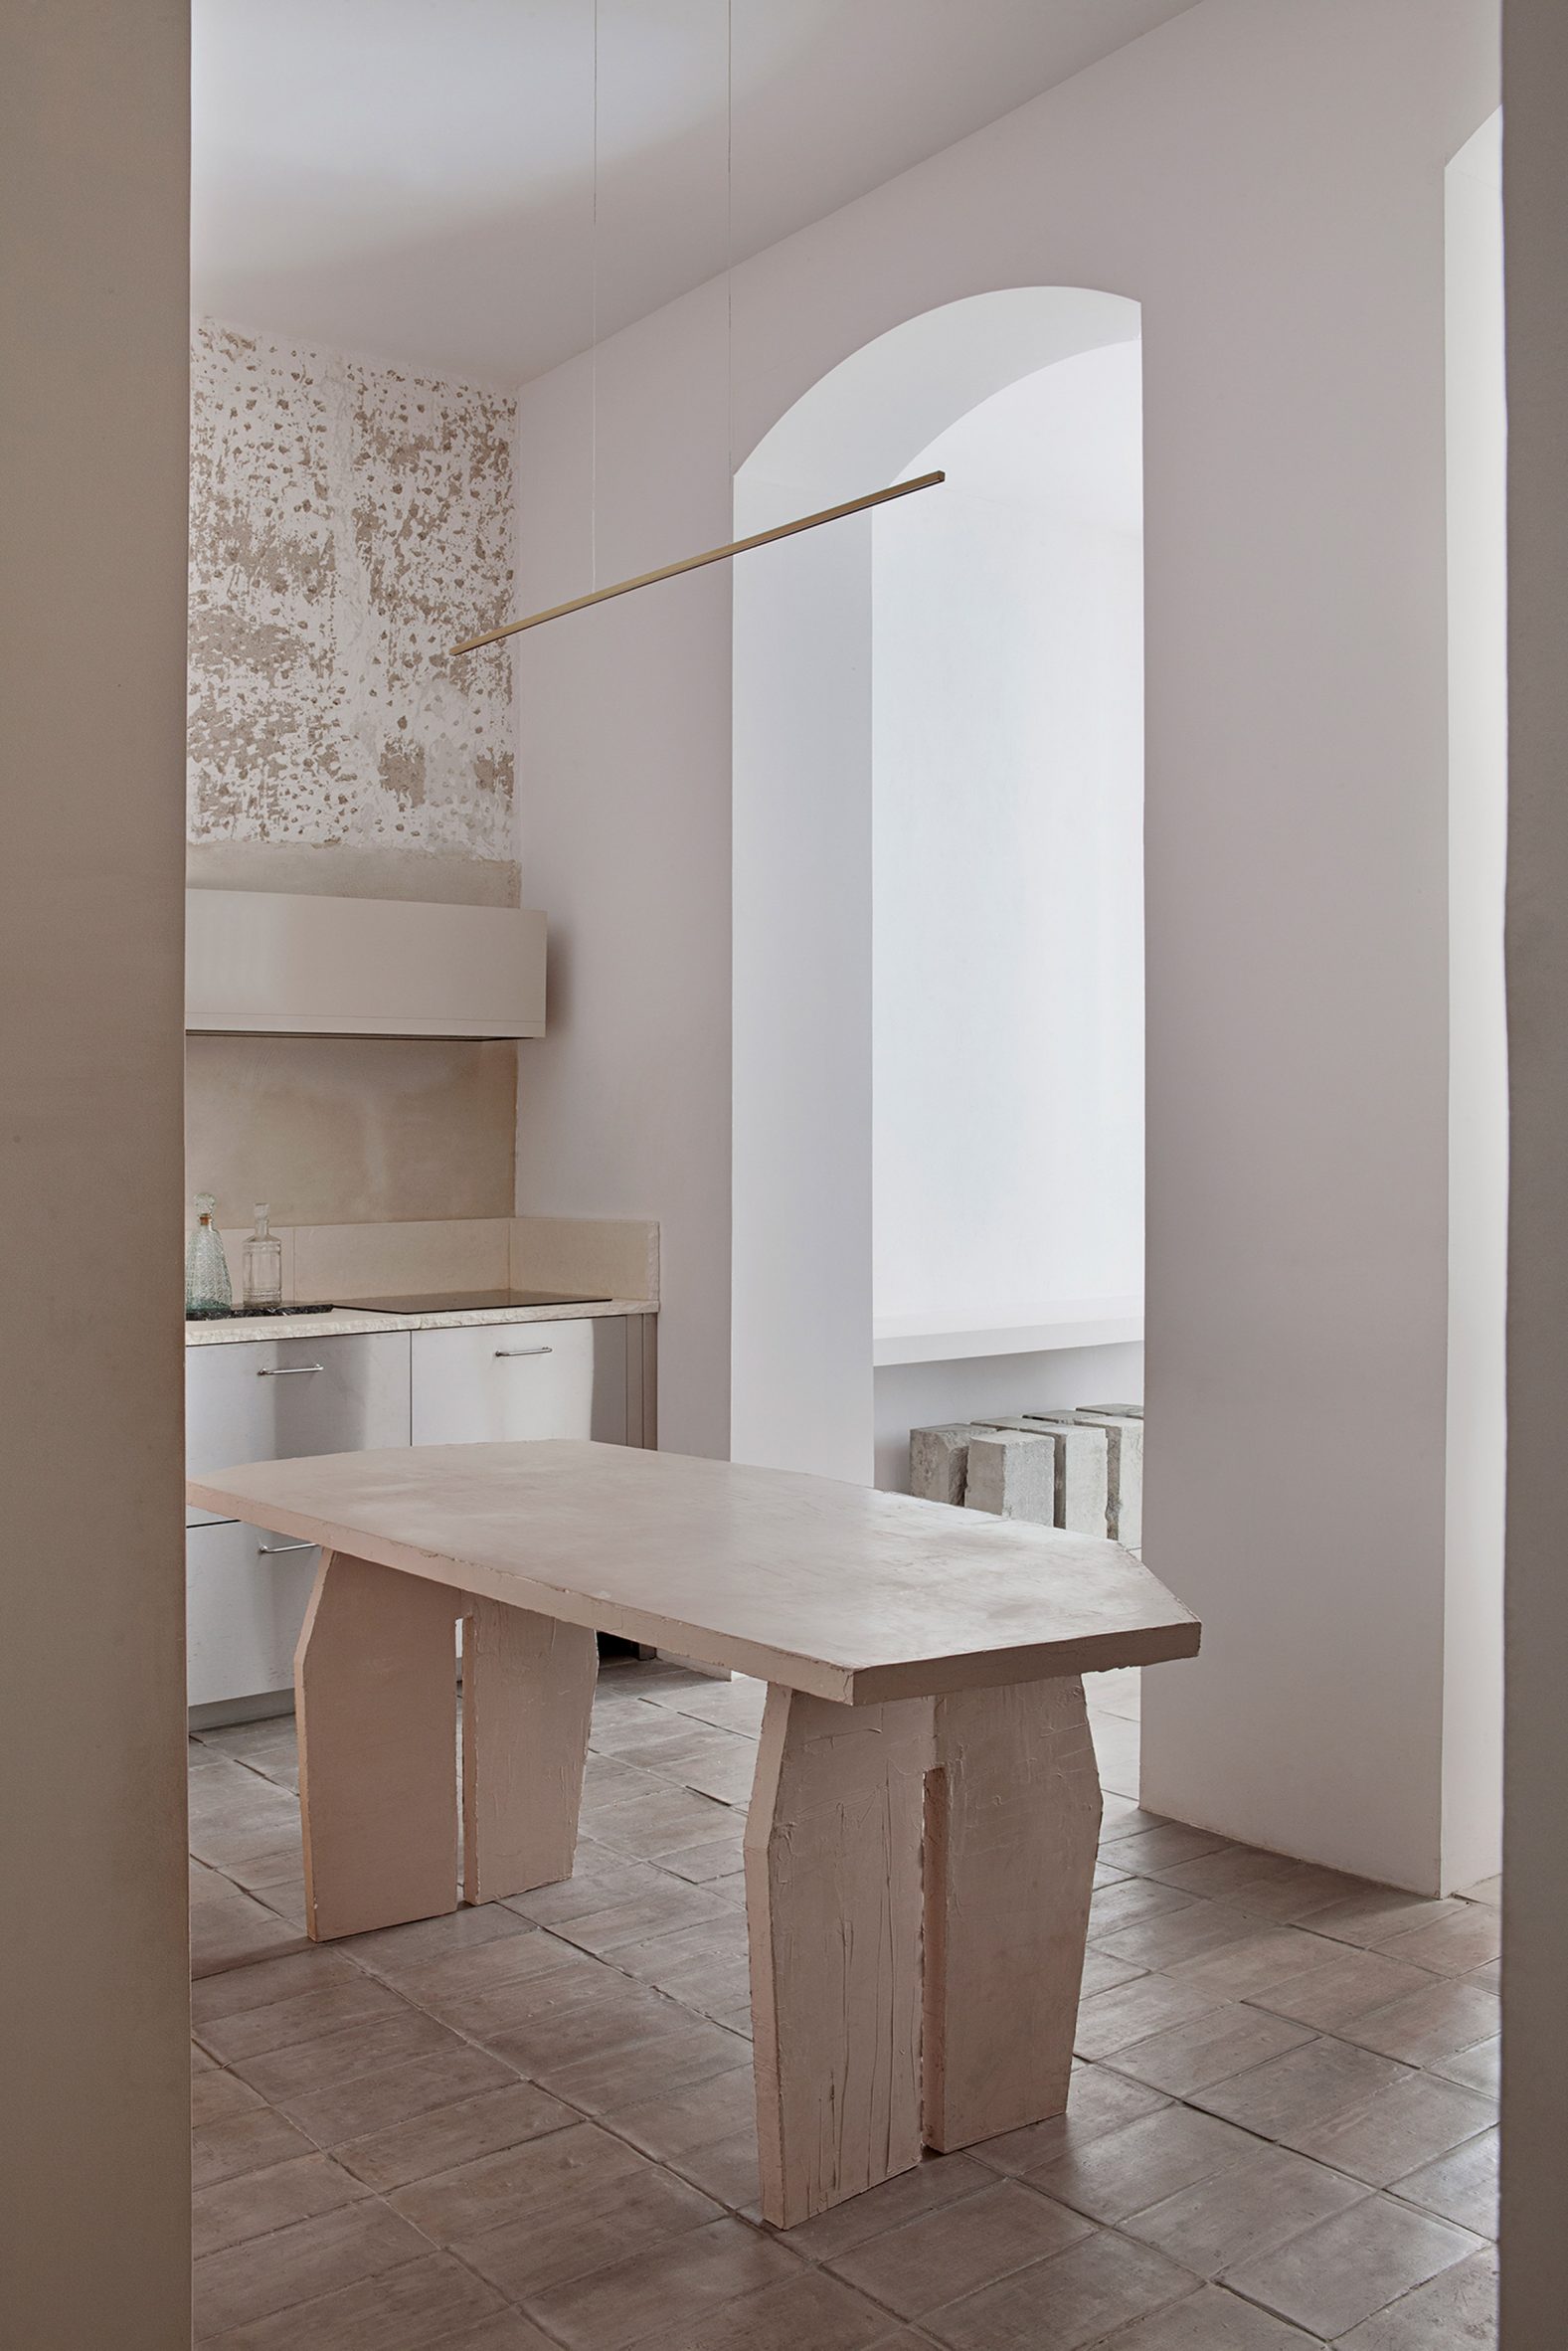 Kitchen of Casa Olivar with chunky stone dining table